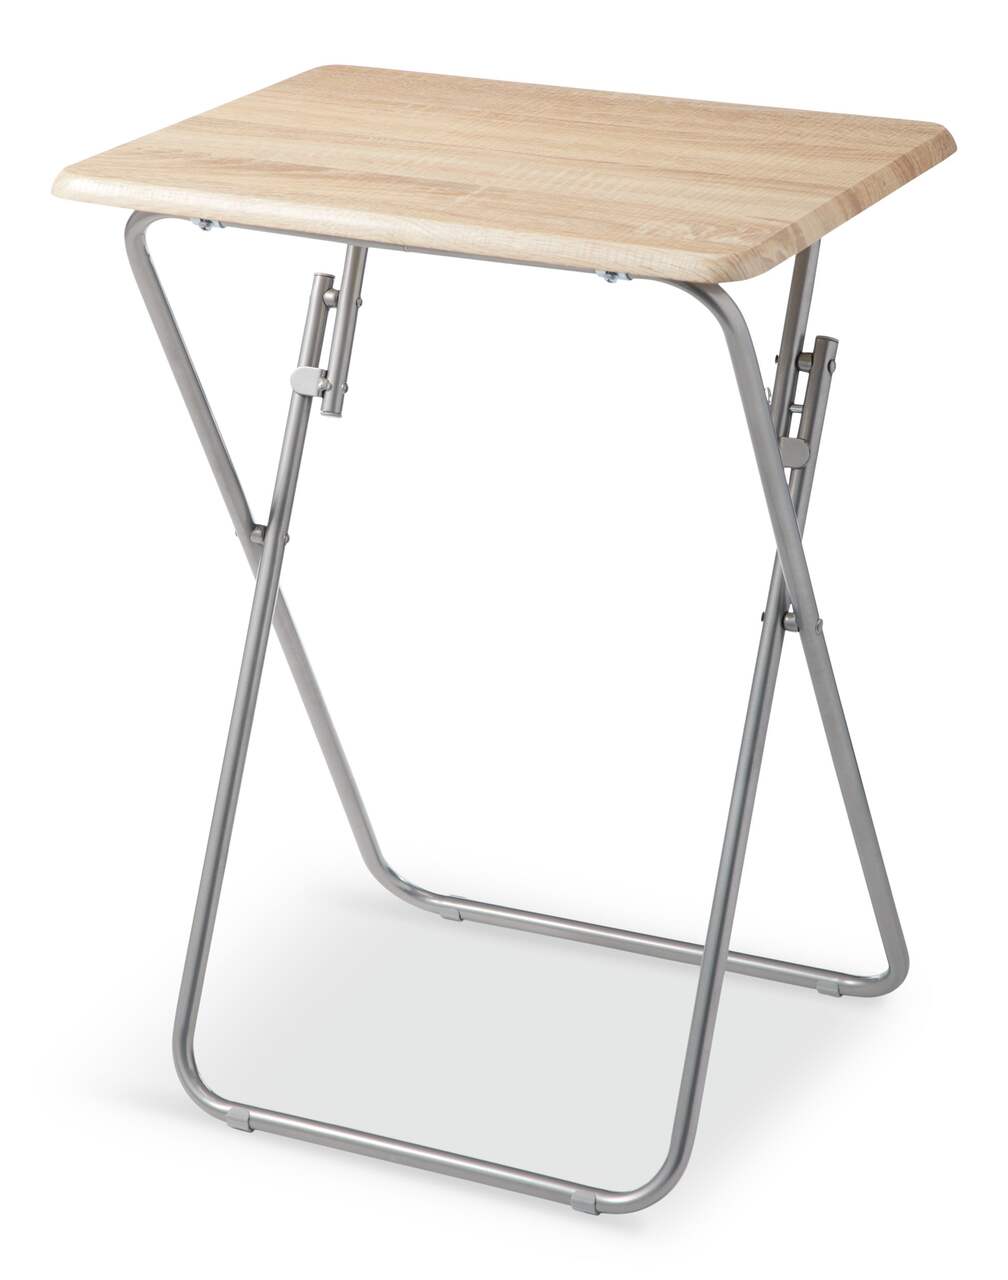 https://media-www.canadiantire.ca/product/living/home-decor/folding-furniture/0681523/for-living-wood-grain-folding-tray-table--2aff01d3-e165-4df3-a7ab-2b671645c04a-jpgrendition.jpg?imdensity=1&imwidth=640&impolicy=mZoom